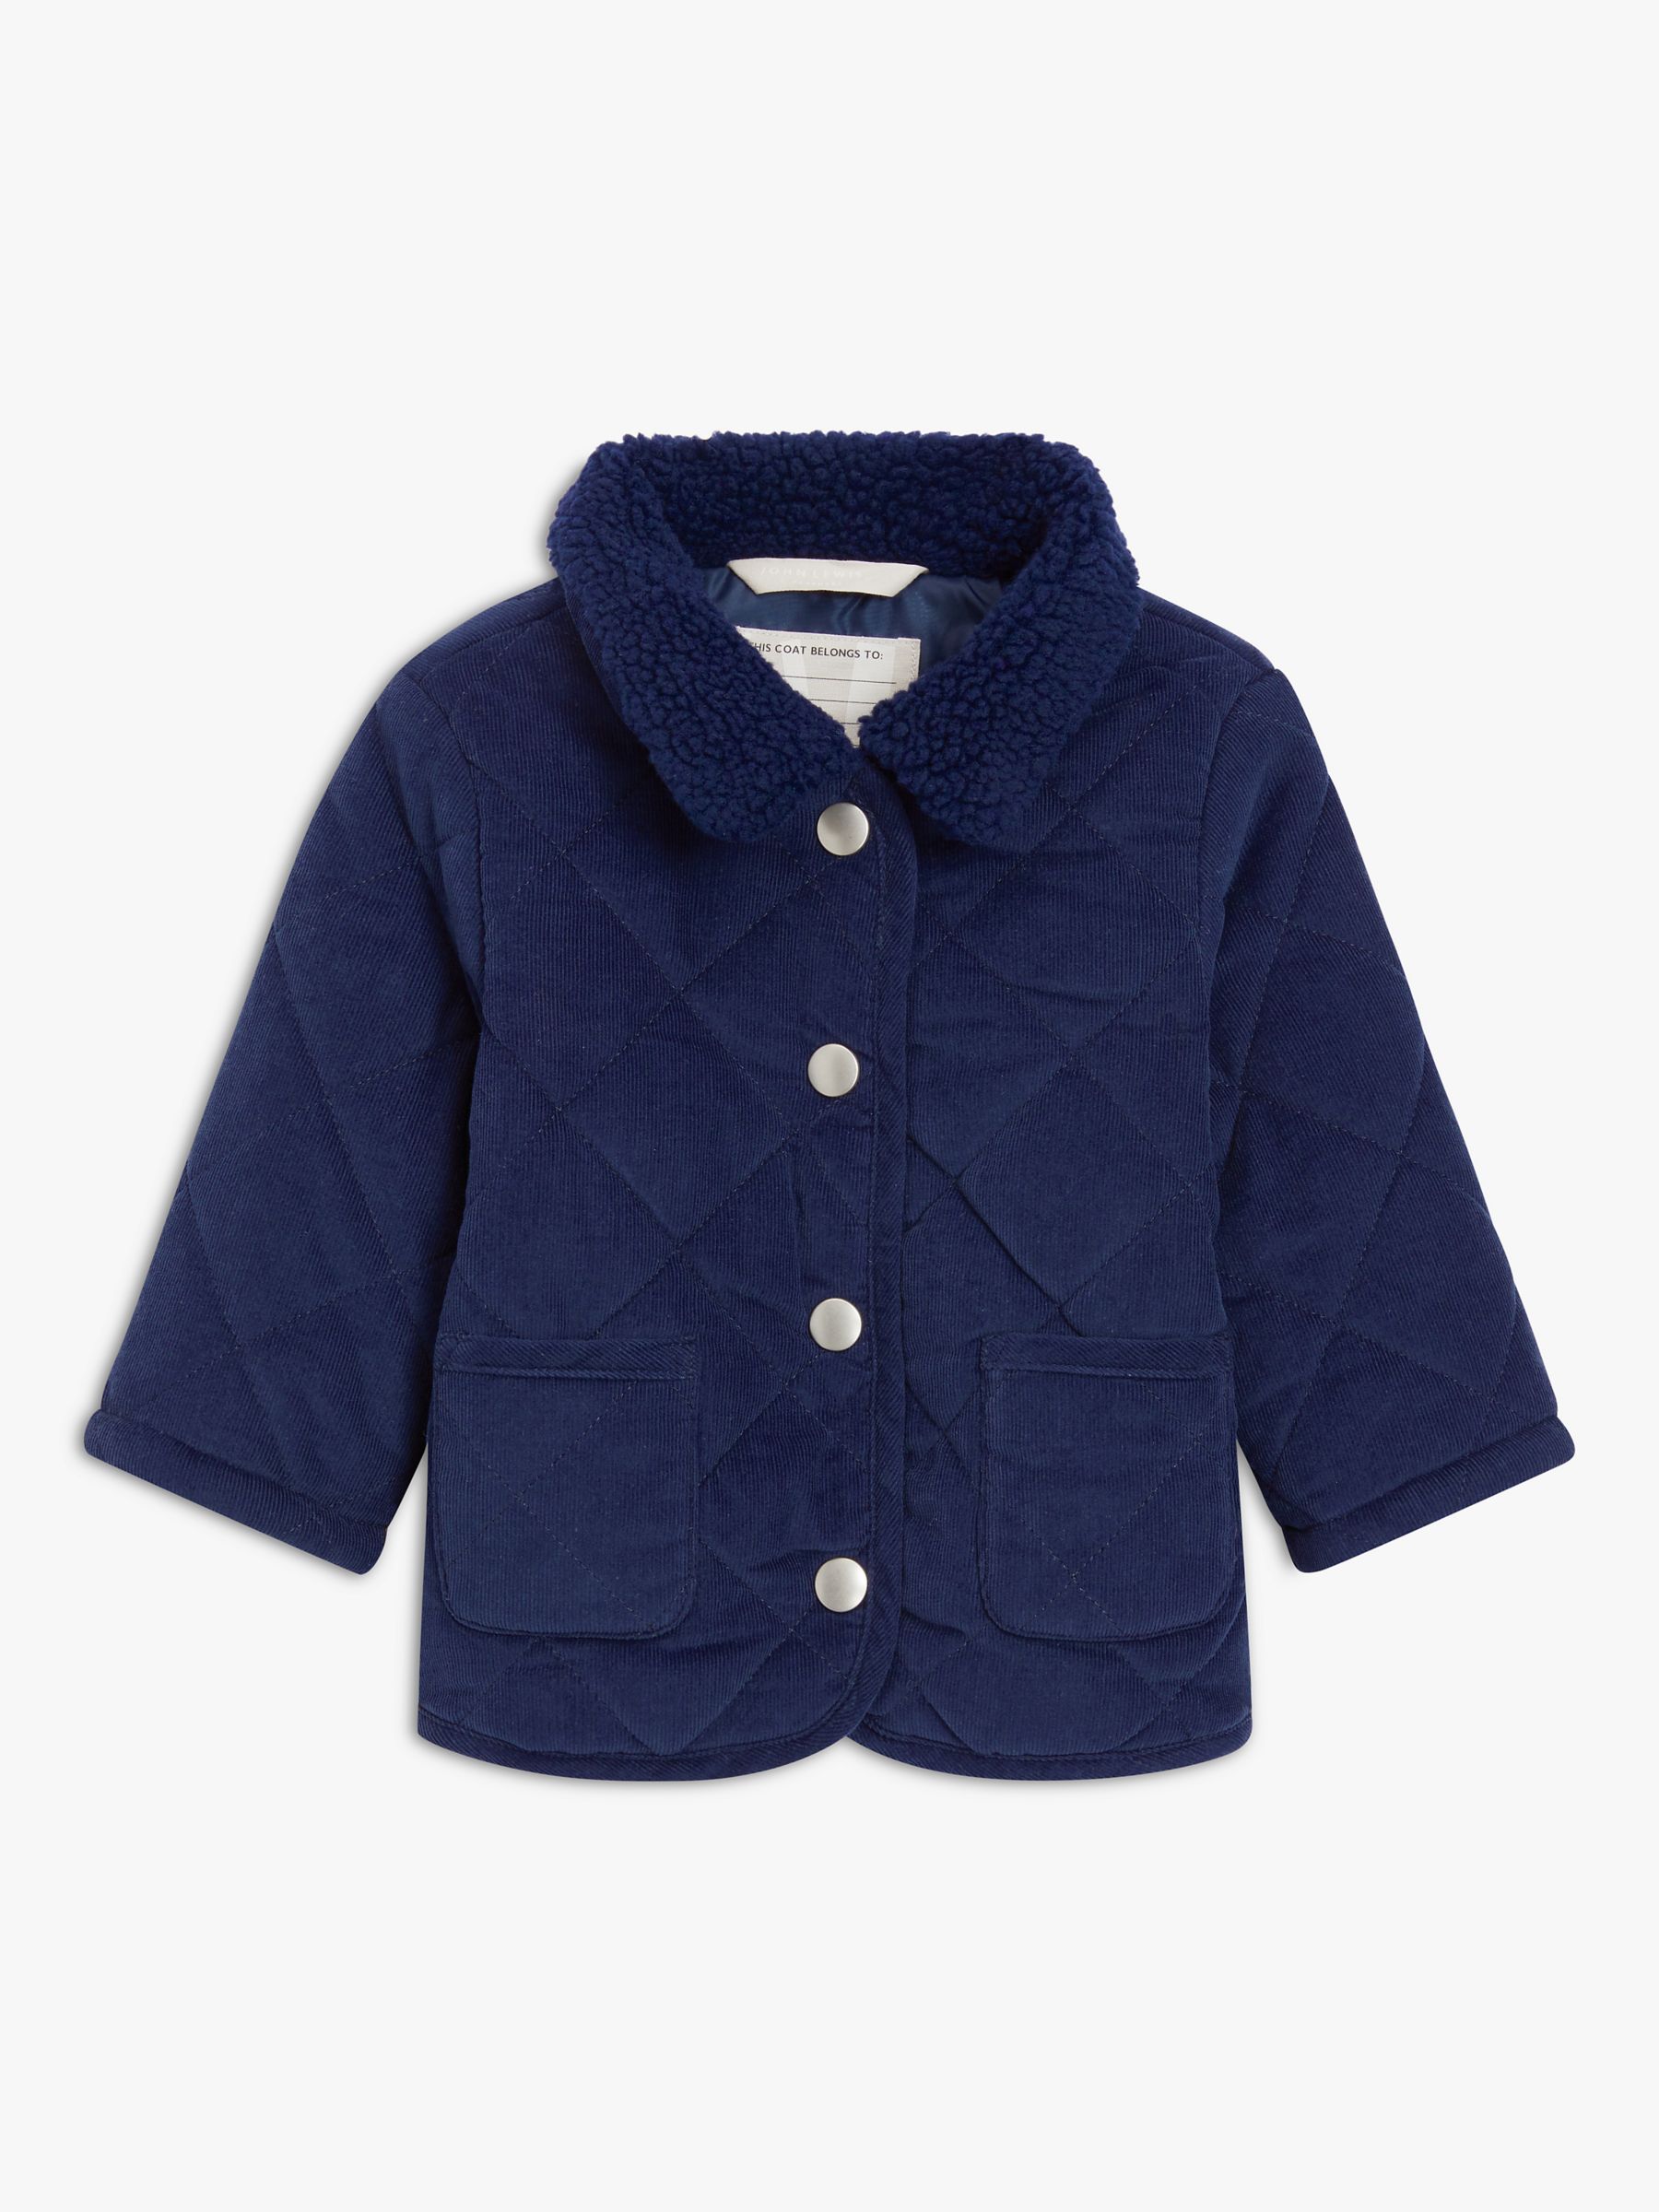 John Lewis Baby Needlecord Quilted Jacket, Navy, 3-6 months